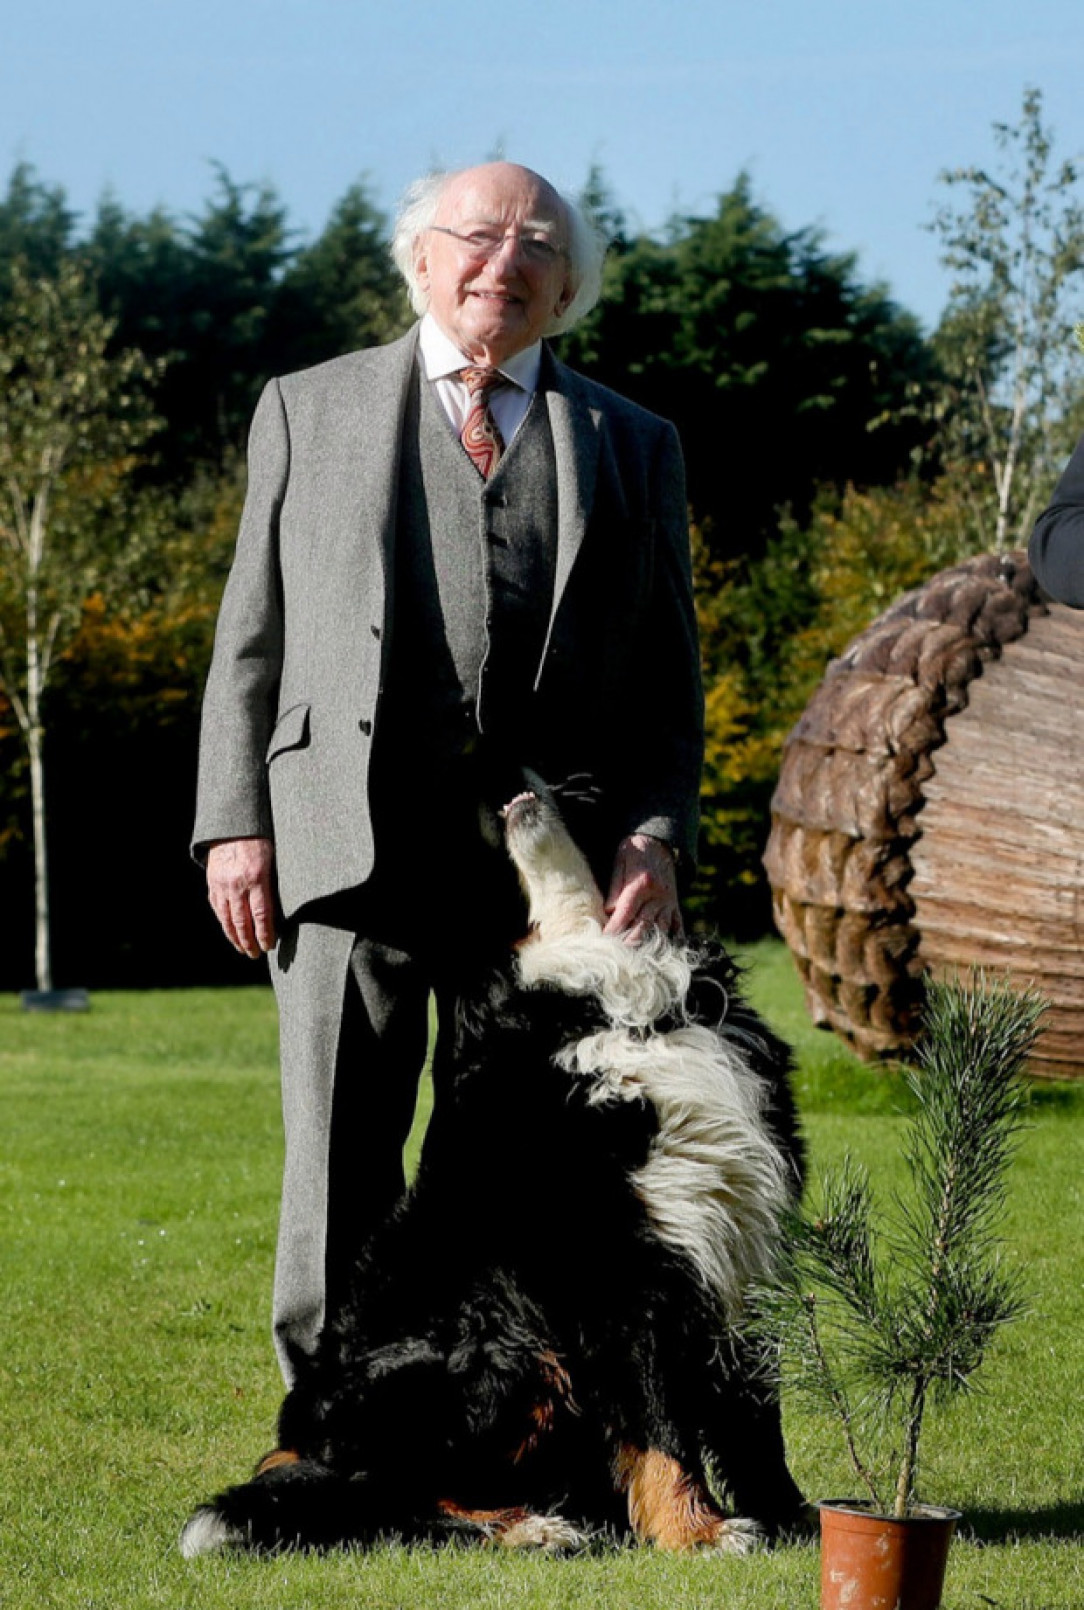 The President of Ireland and Brod his dog